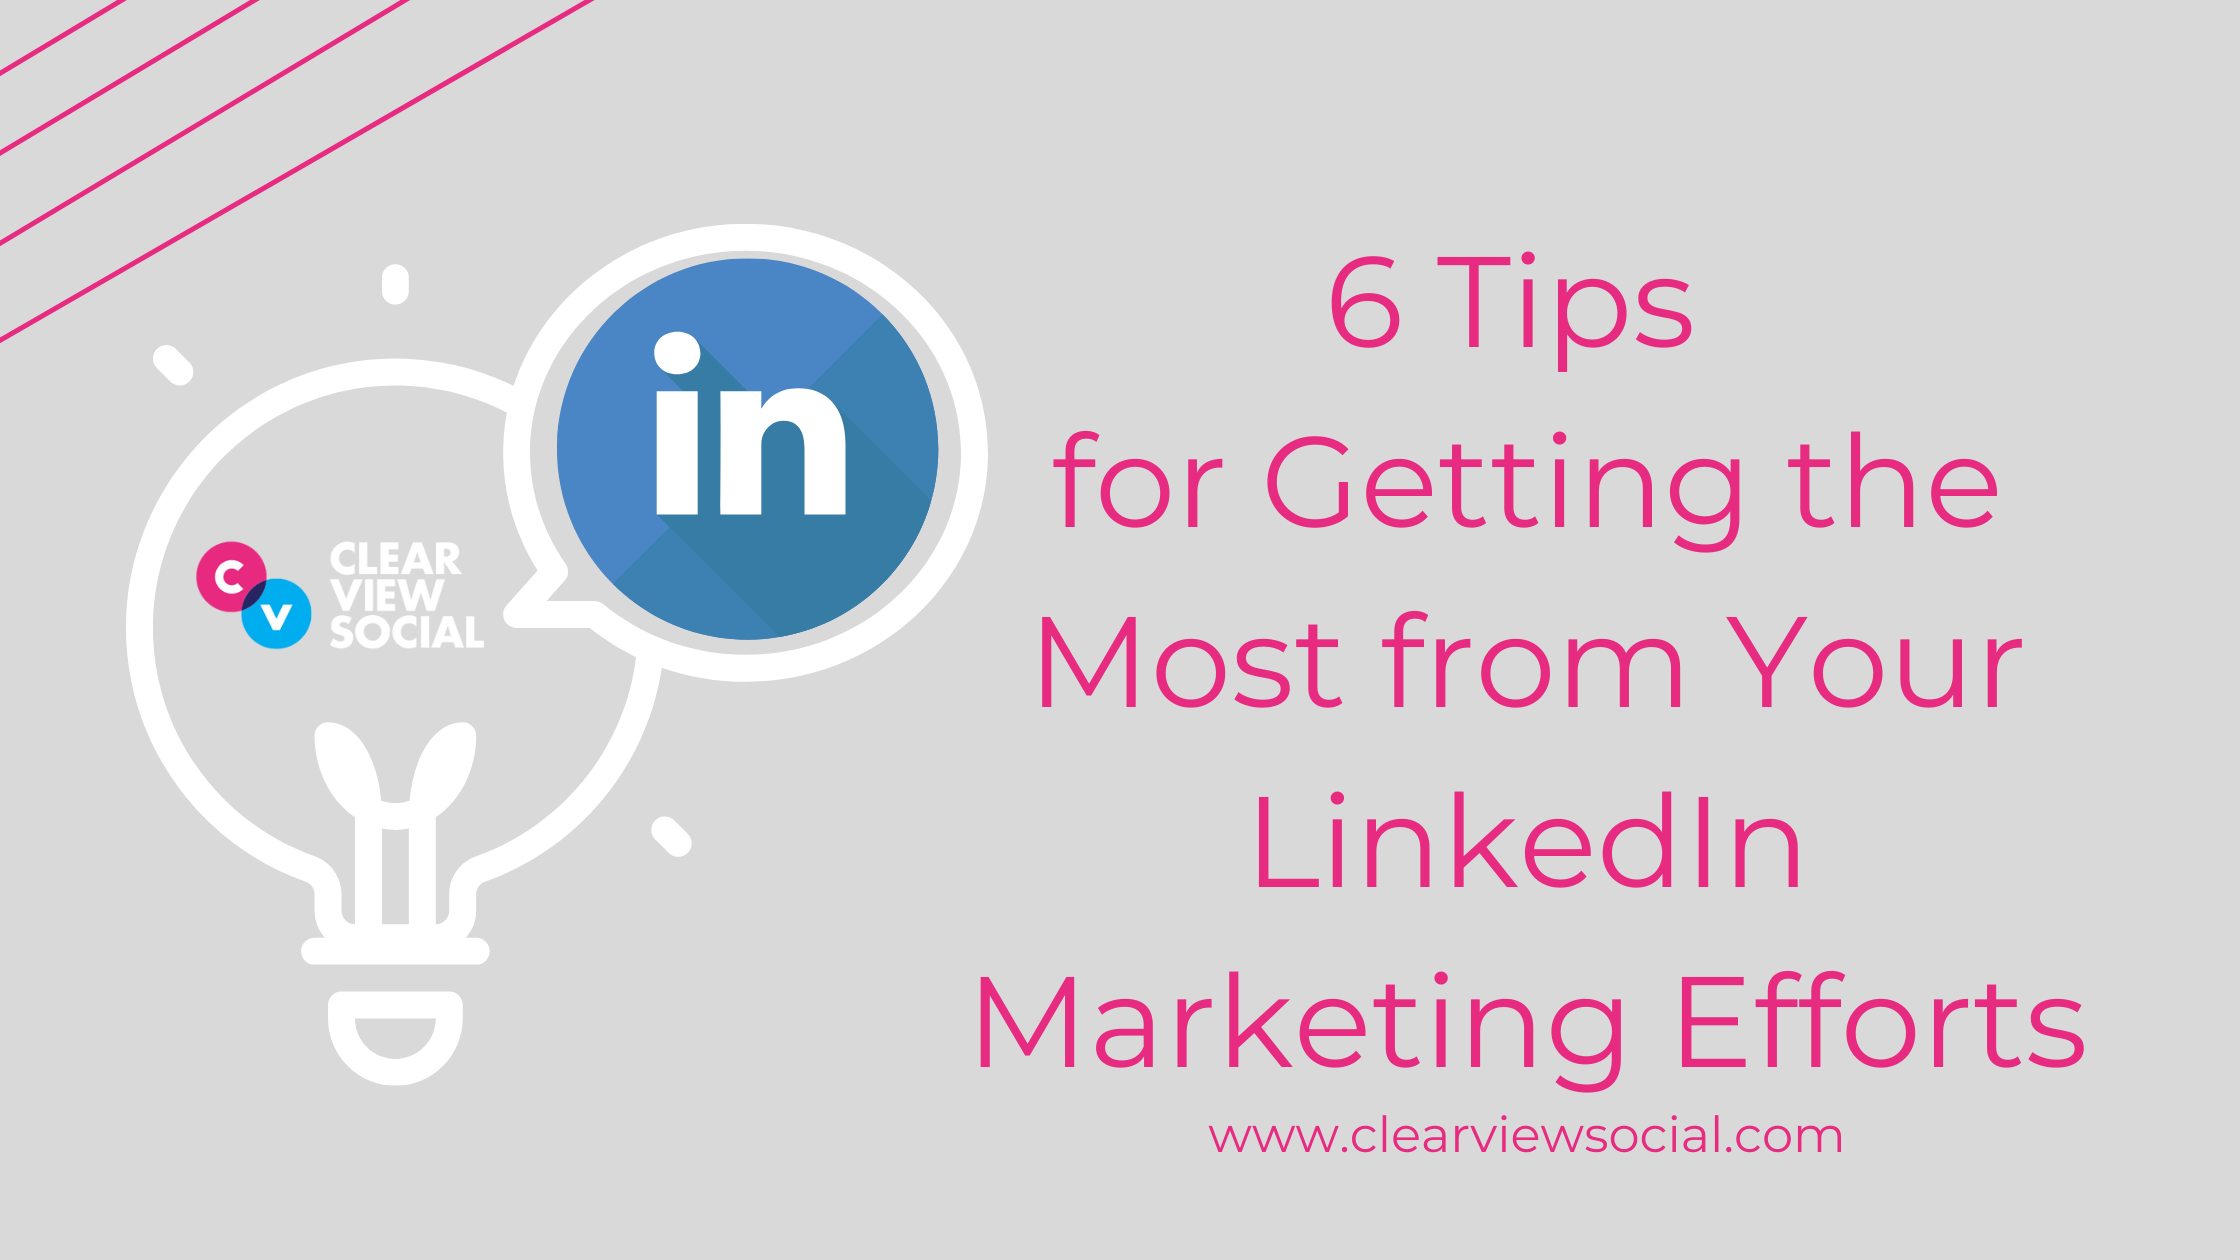 6 Tips for Getting the Most from Your LinkedIn Marketing Efforts